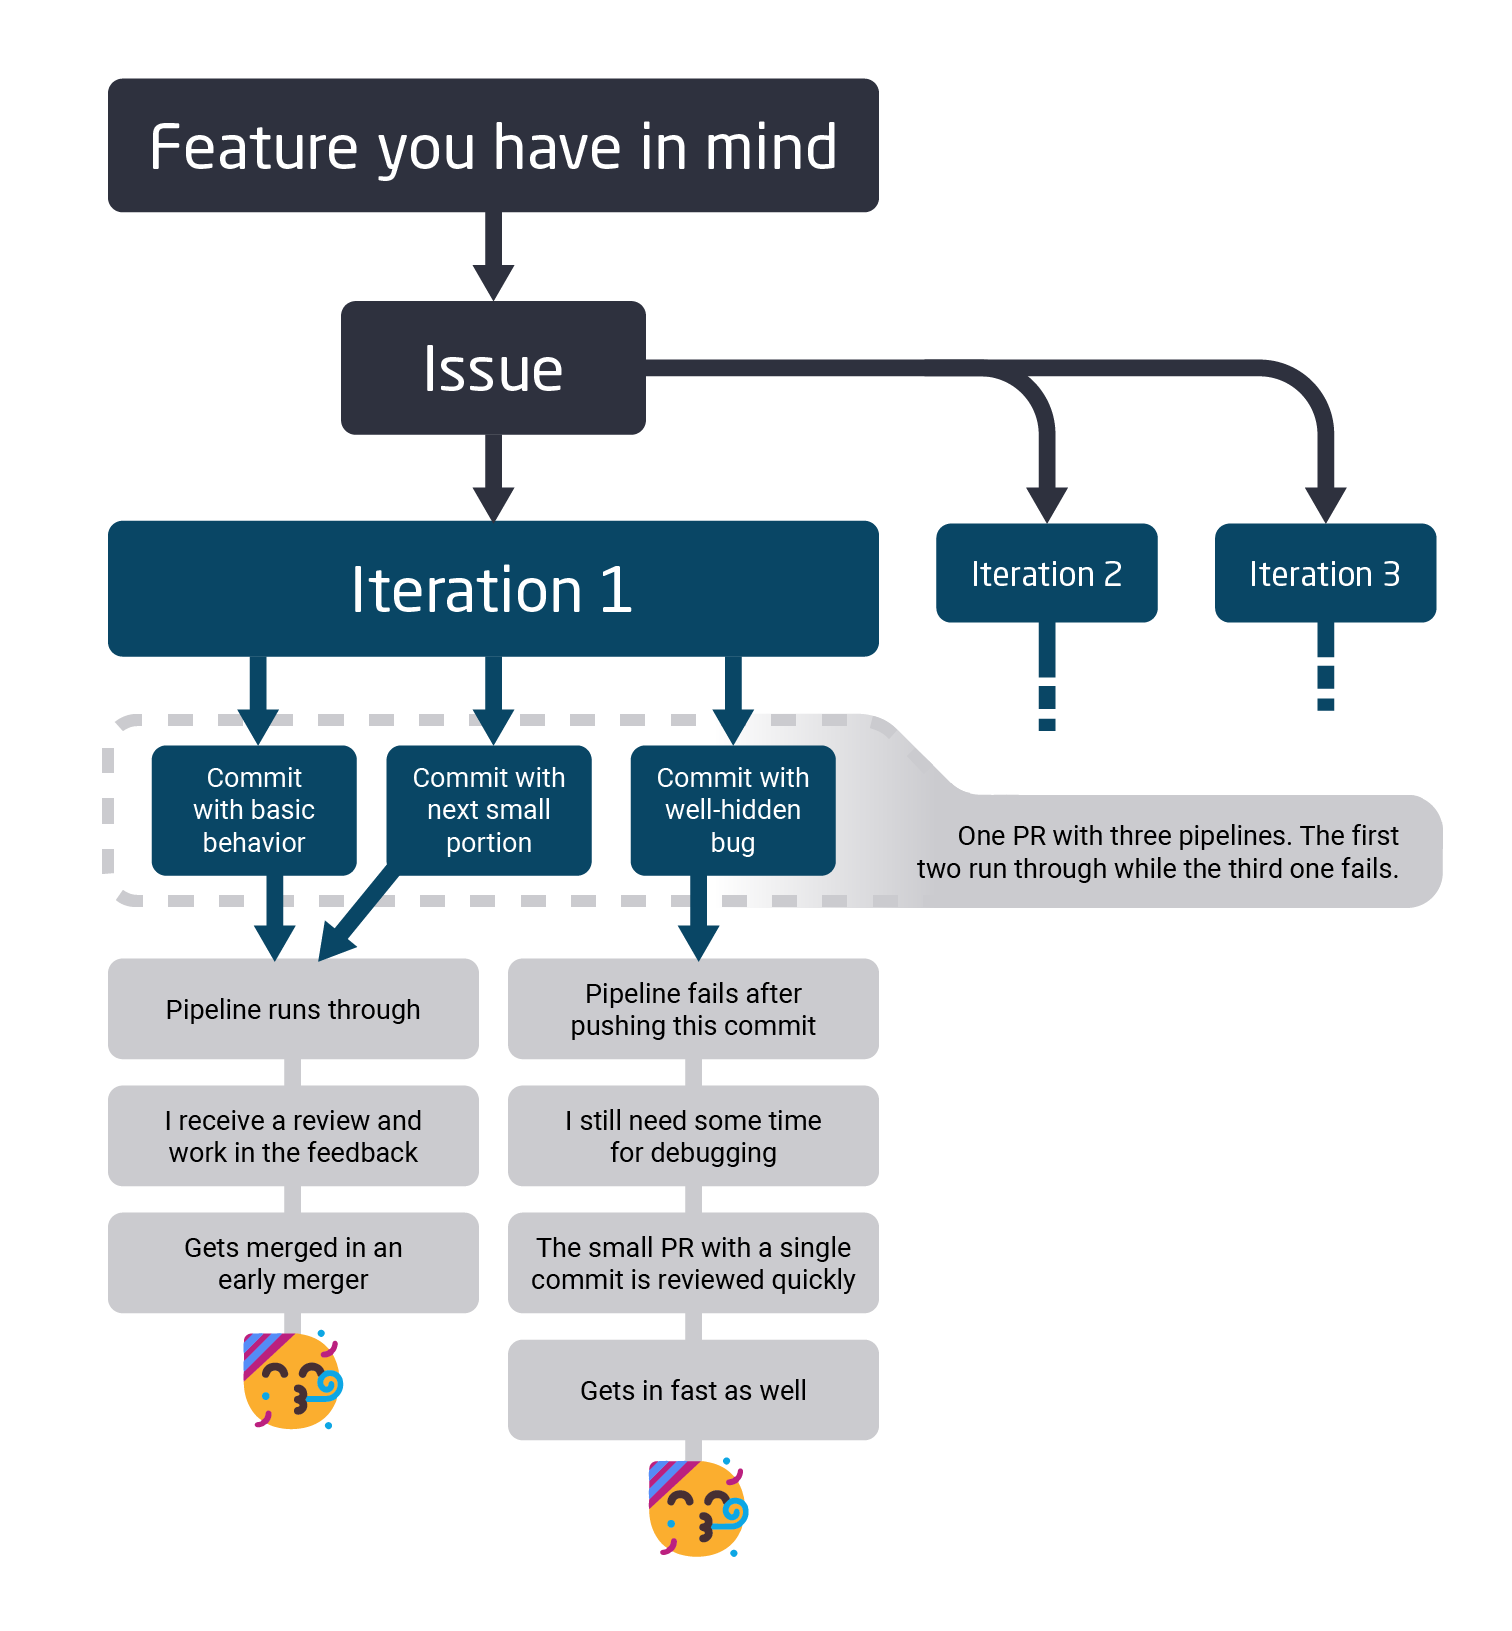 This flowchart explores an incremental development workflow with short iterations including issue planning, committing and merging.